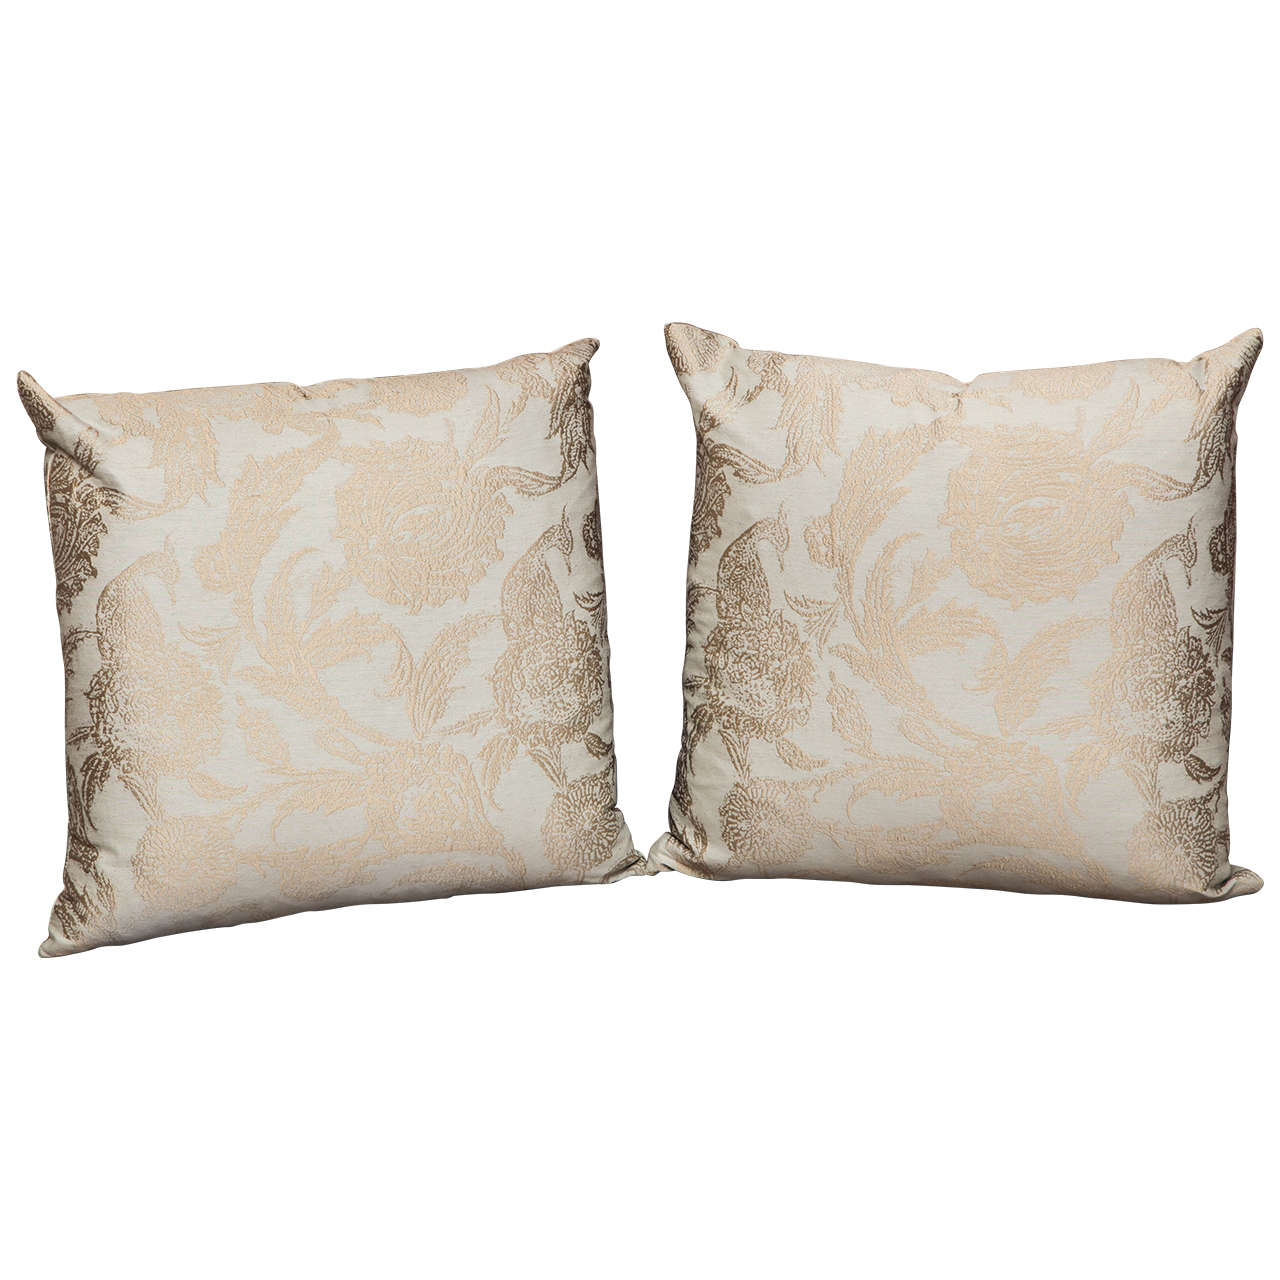 British Colonial Silk Elegant Pillows by Arlene Angard For Sale